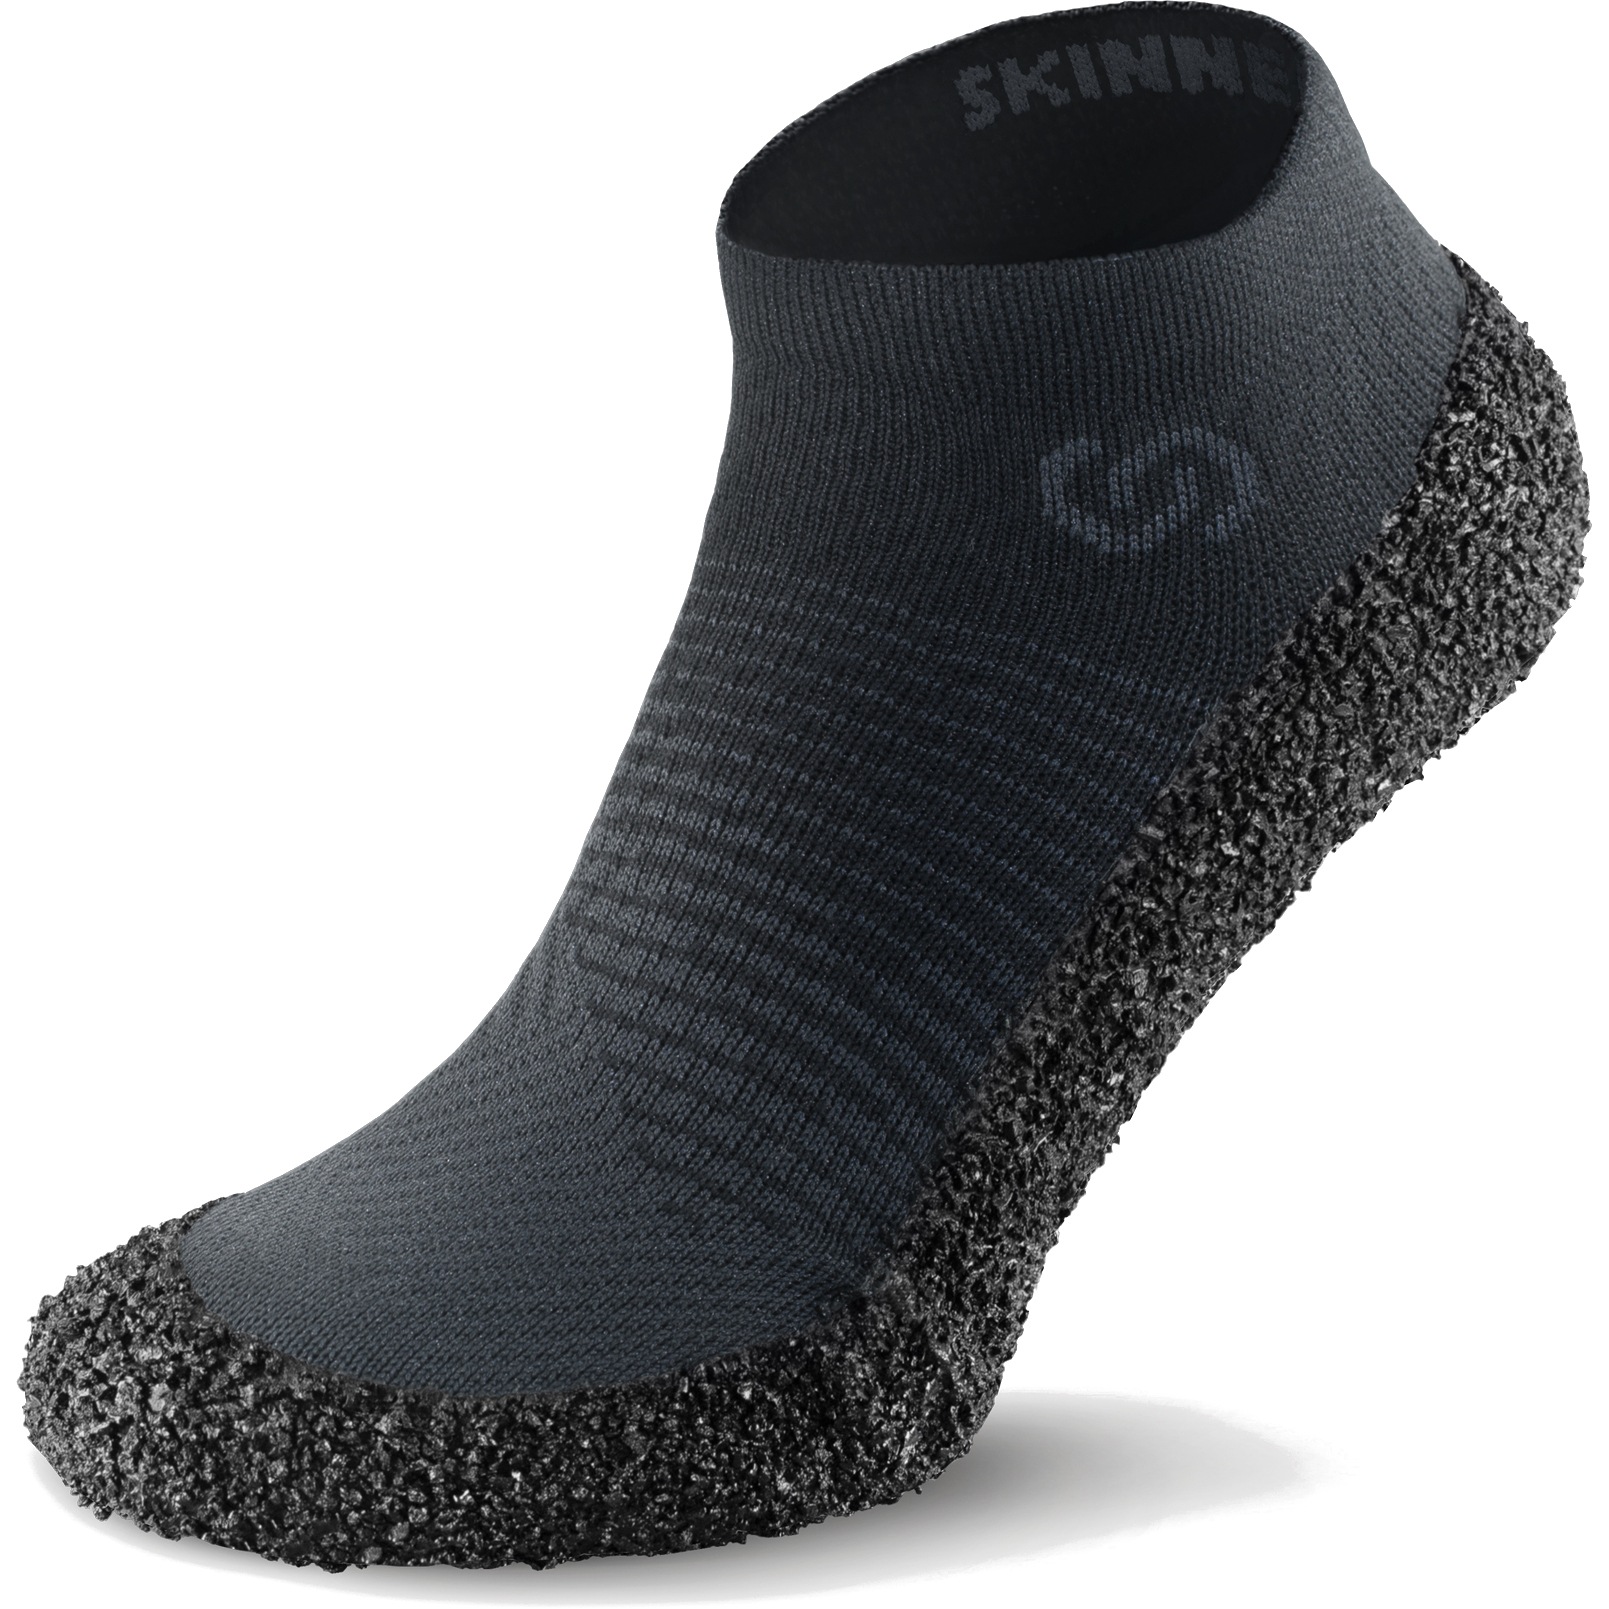 Productfoto van Skinners Sock Shoes 2.0 - anthracite